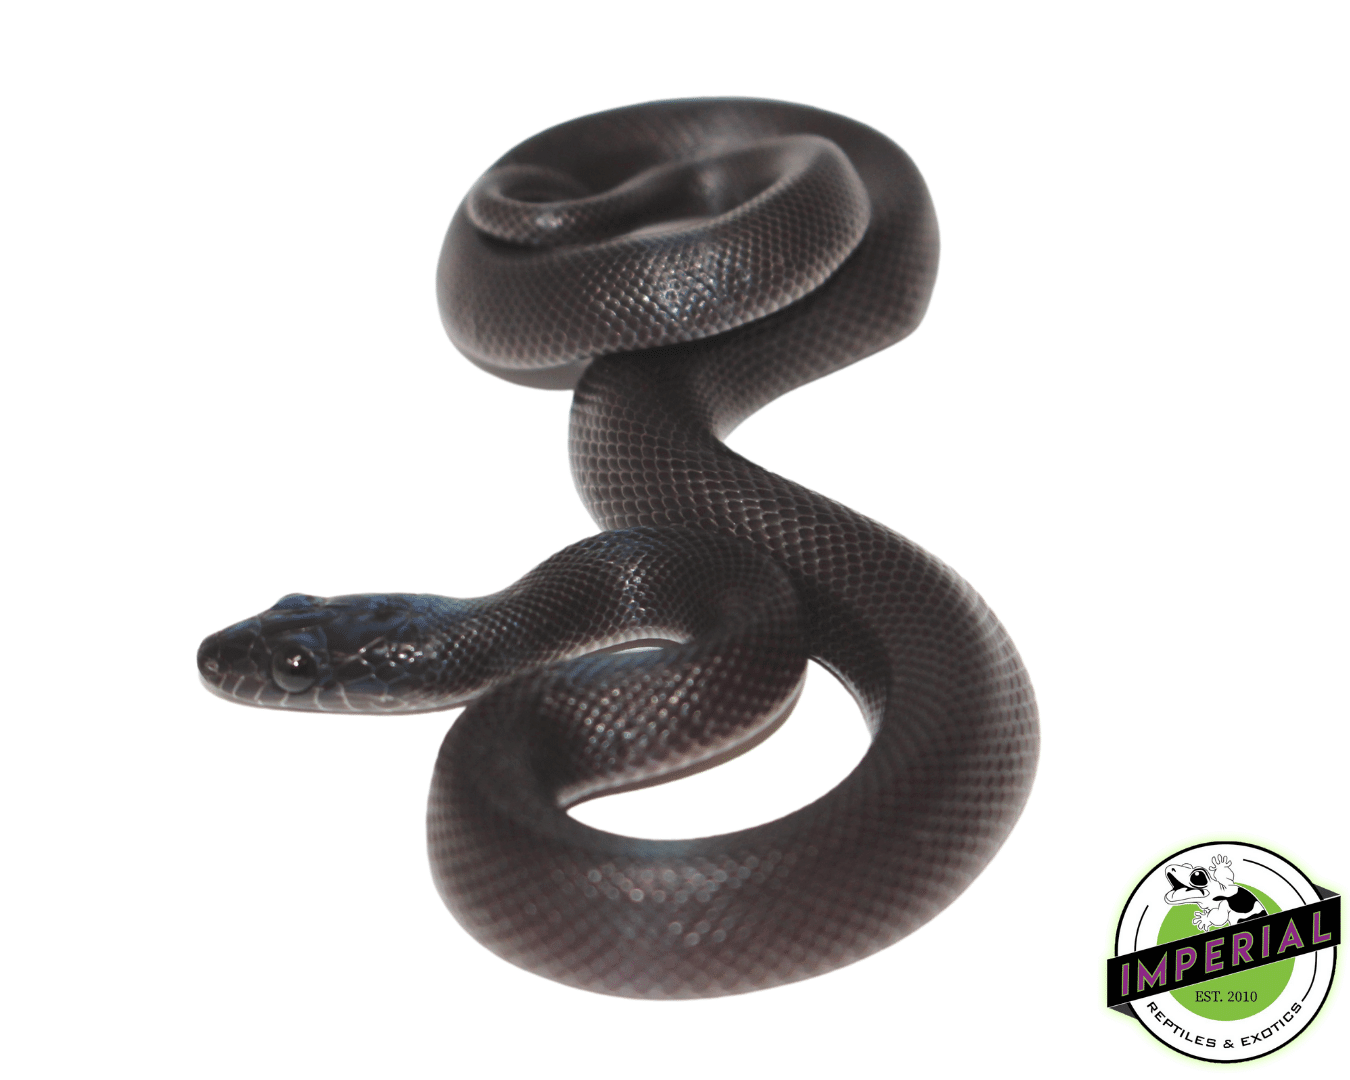 african house snake for sale, buy reptiles online